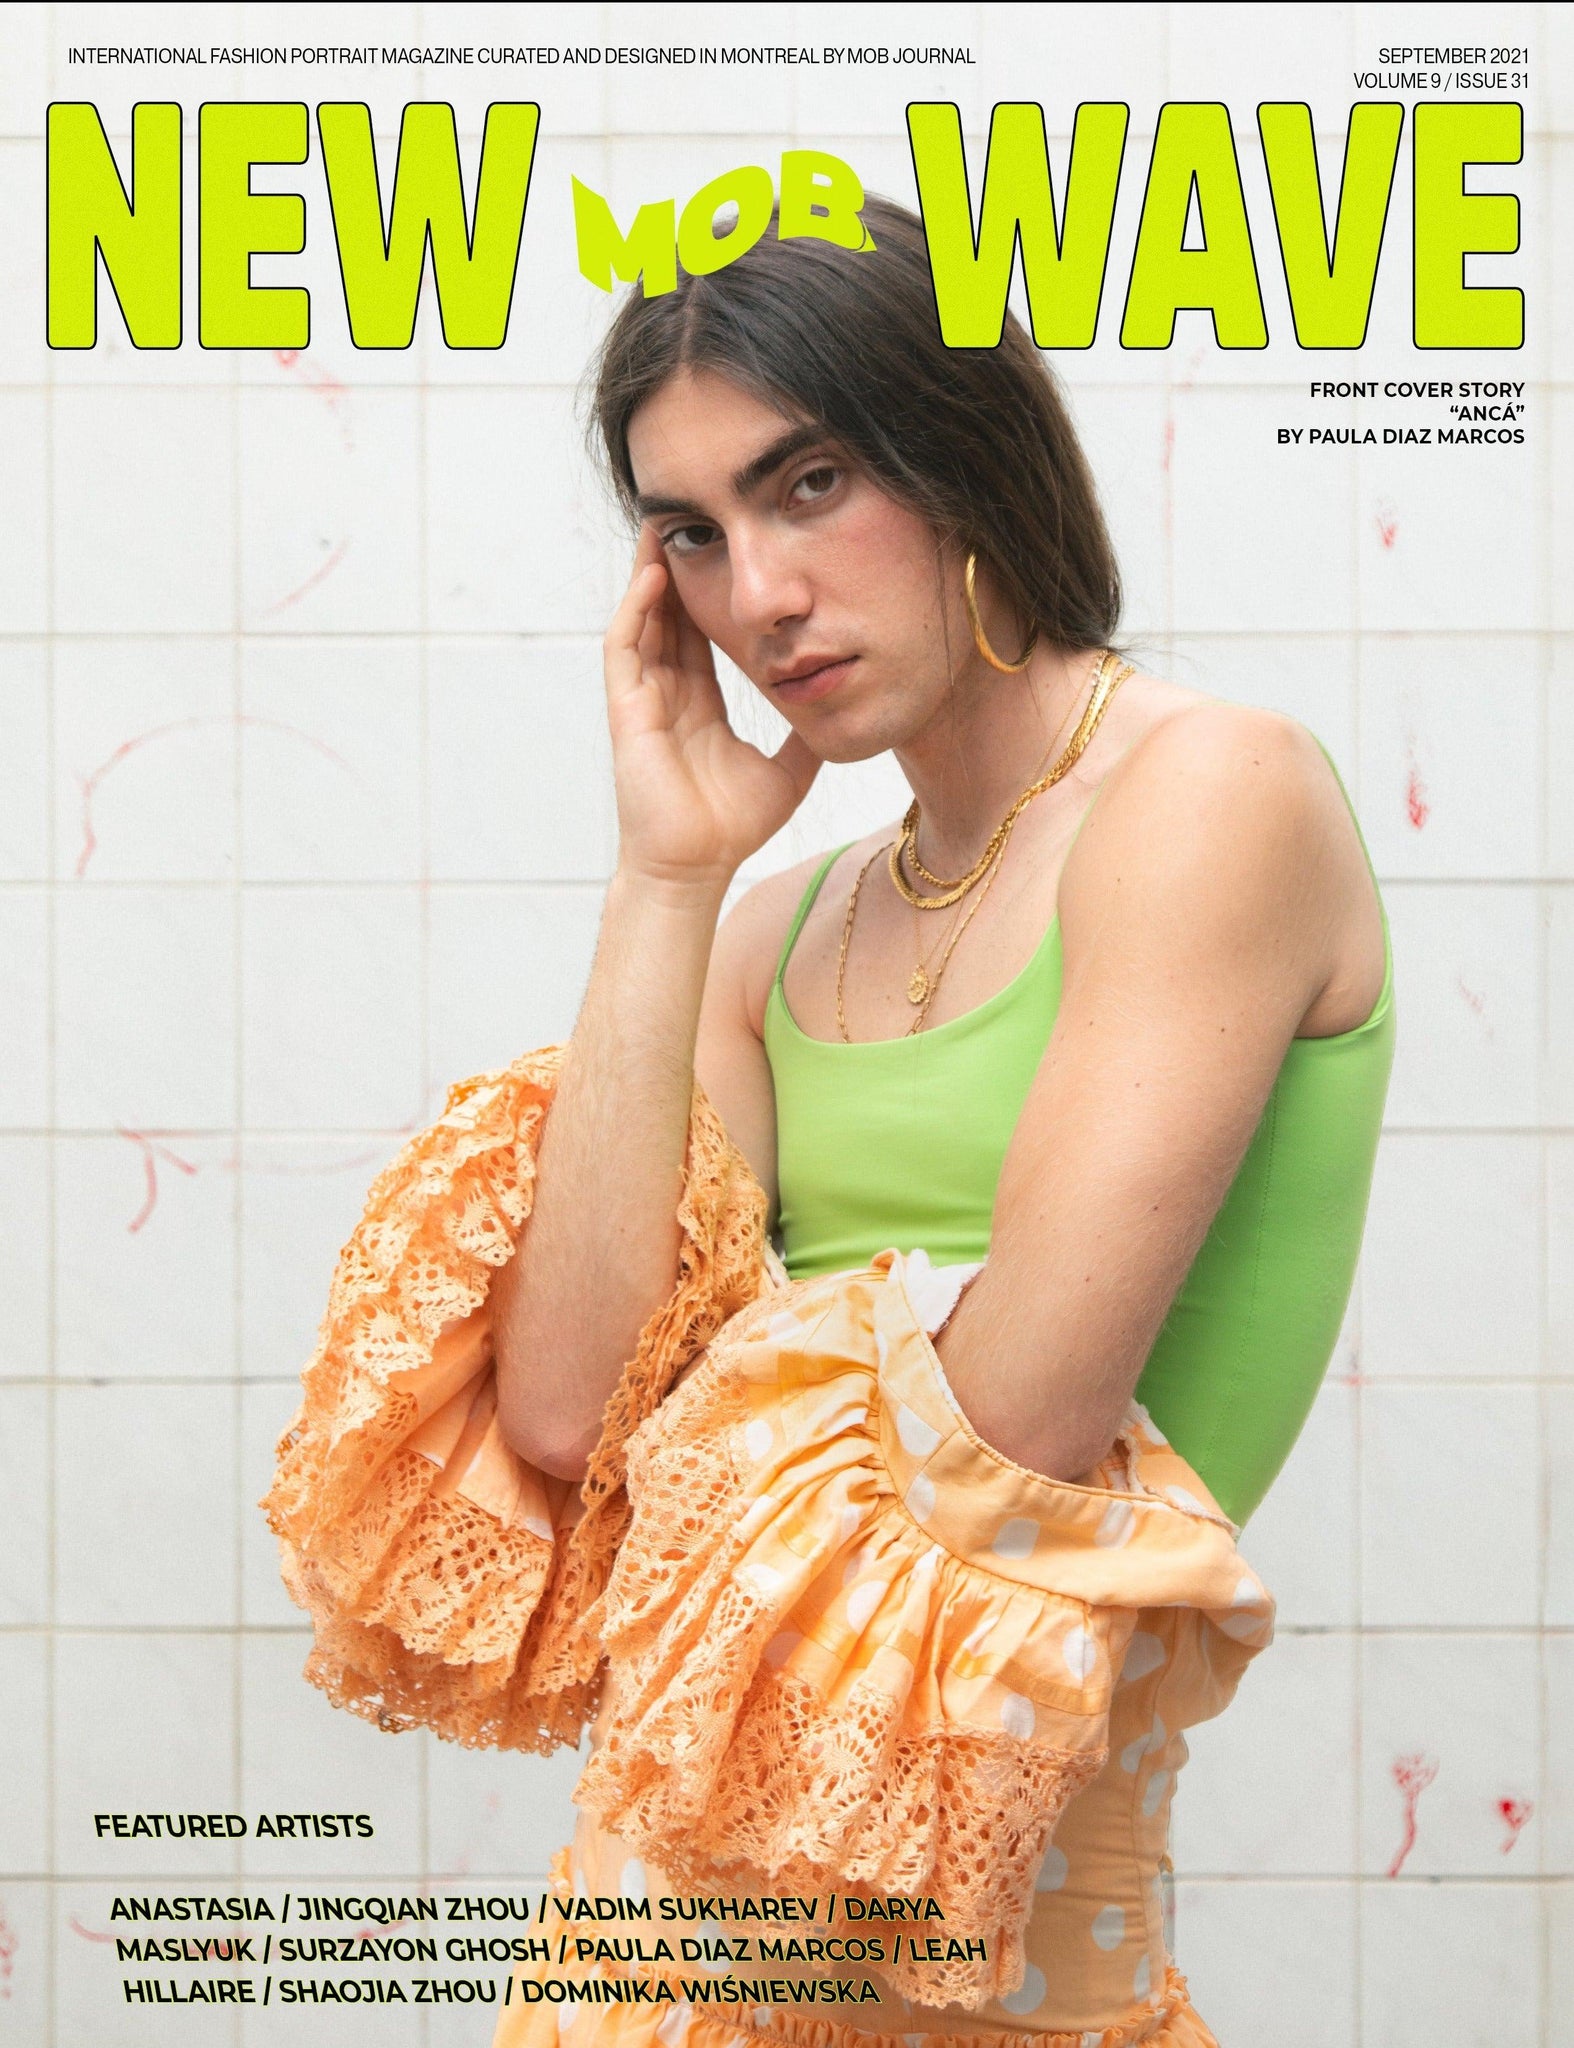 NEW WAVE | VOLUME NINE | ISSUE #31 - Mob Journal